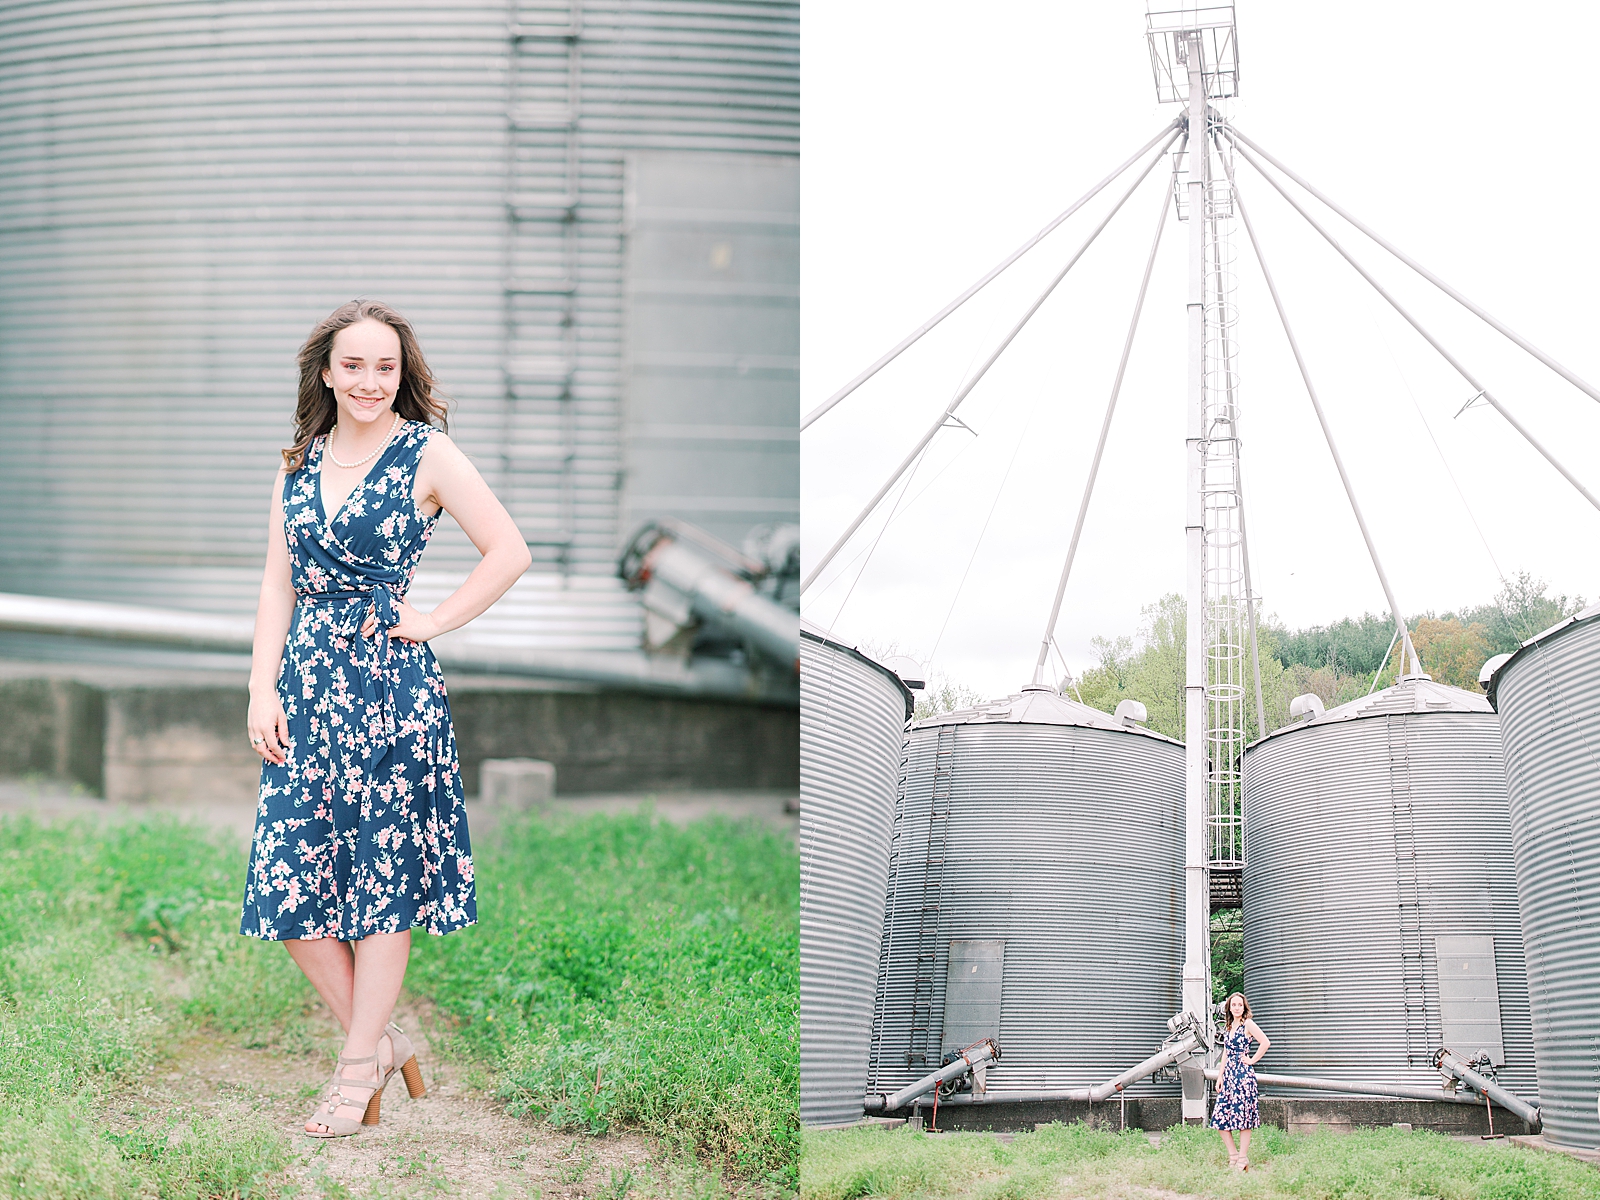 High School Senior Session Zoe in blue floral dress smiling in front of silos Photos